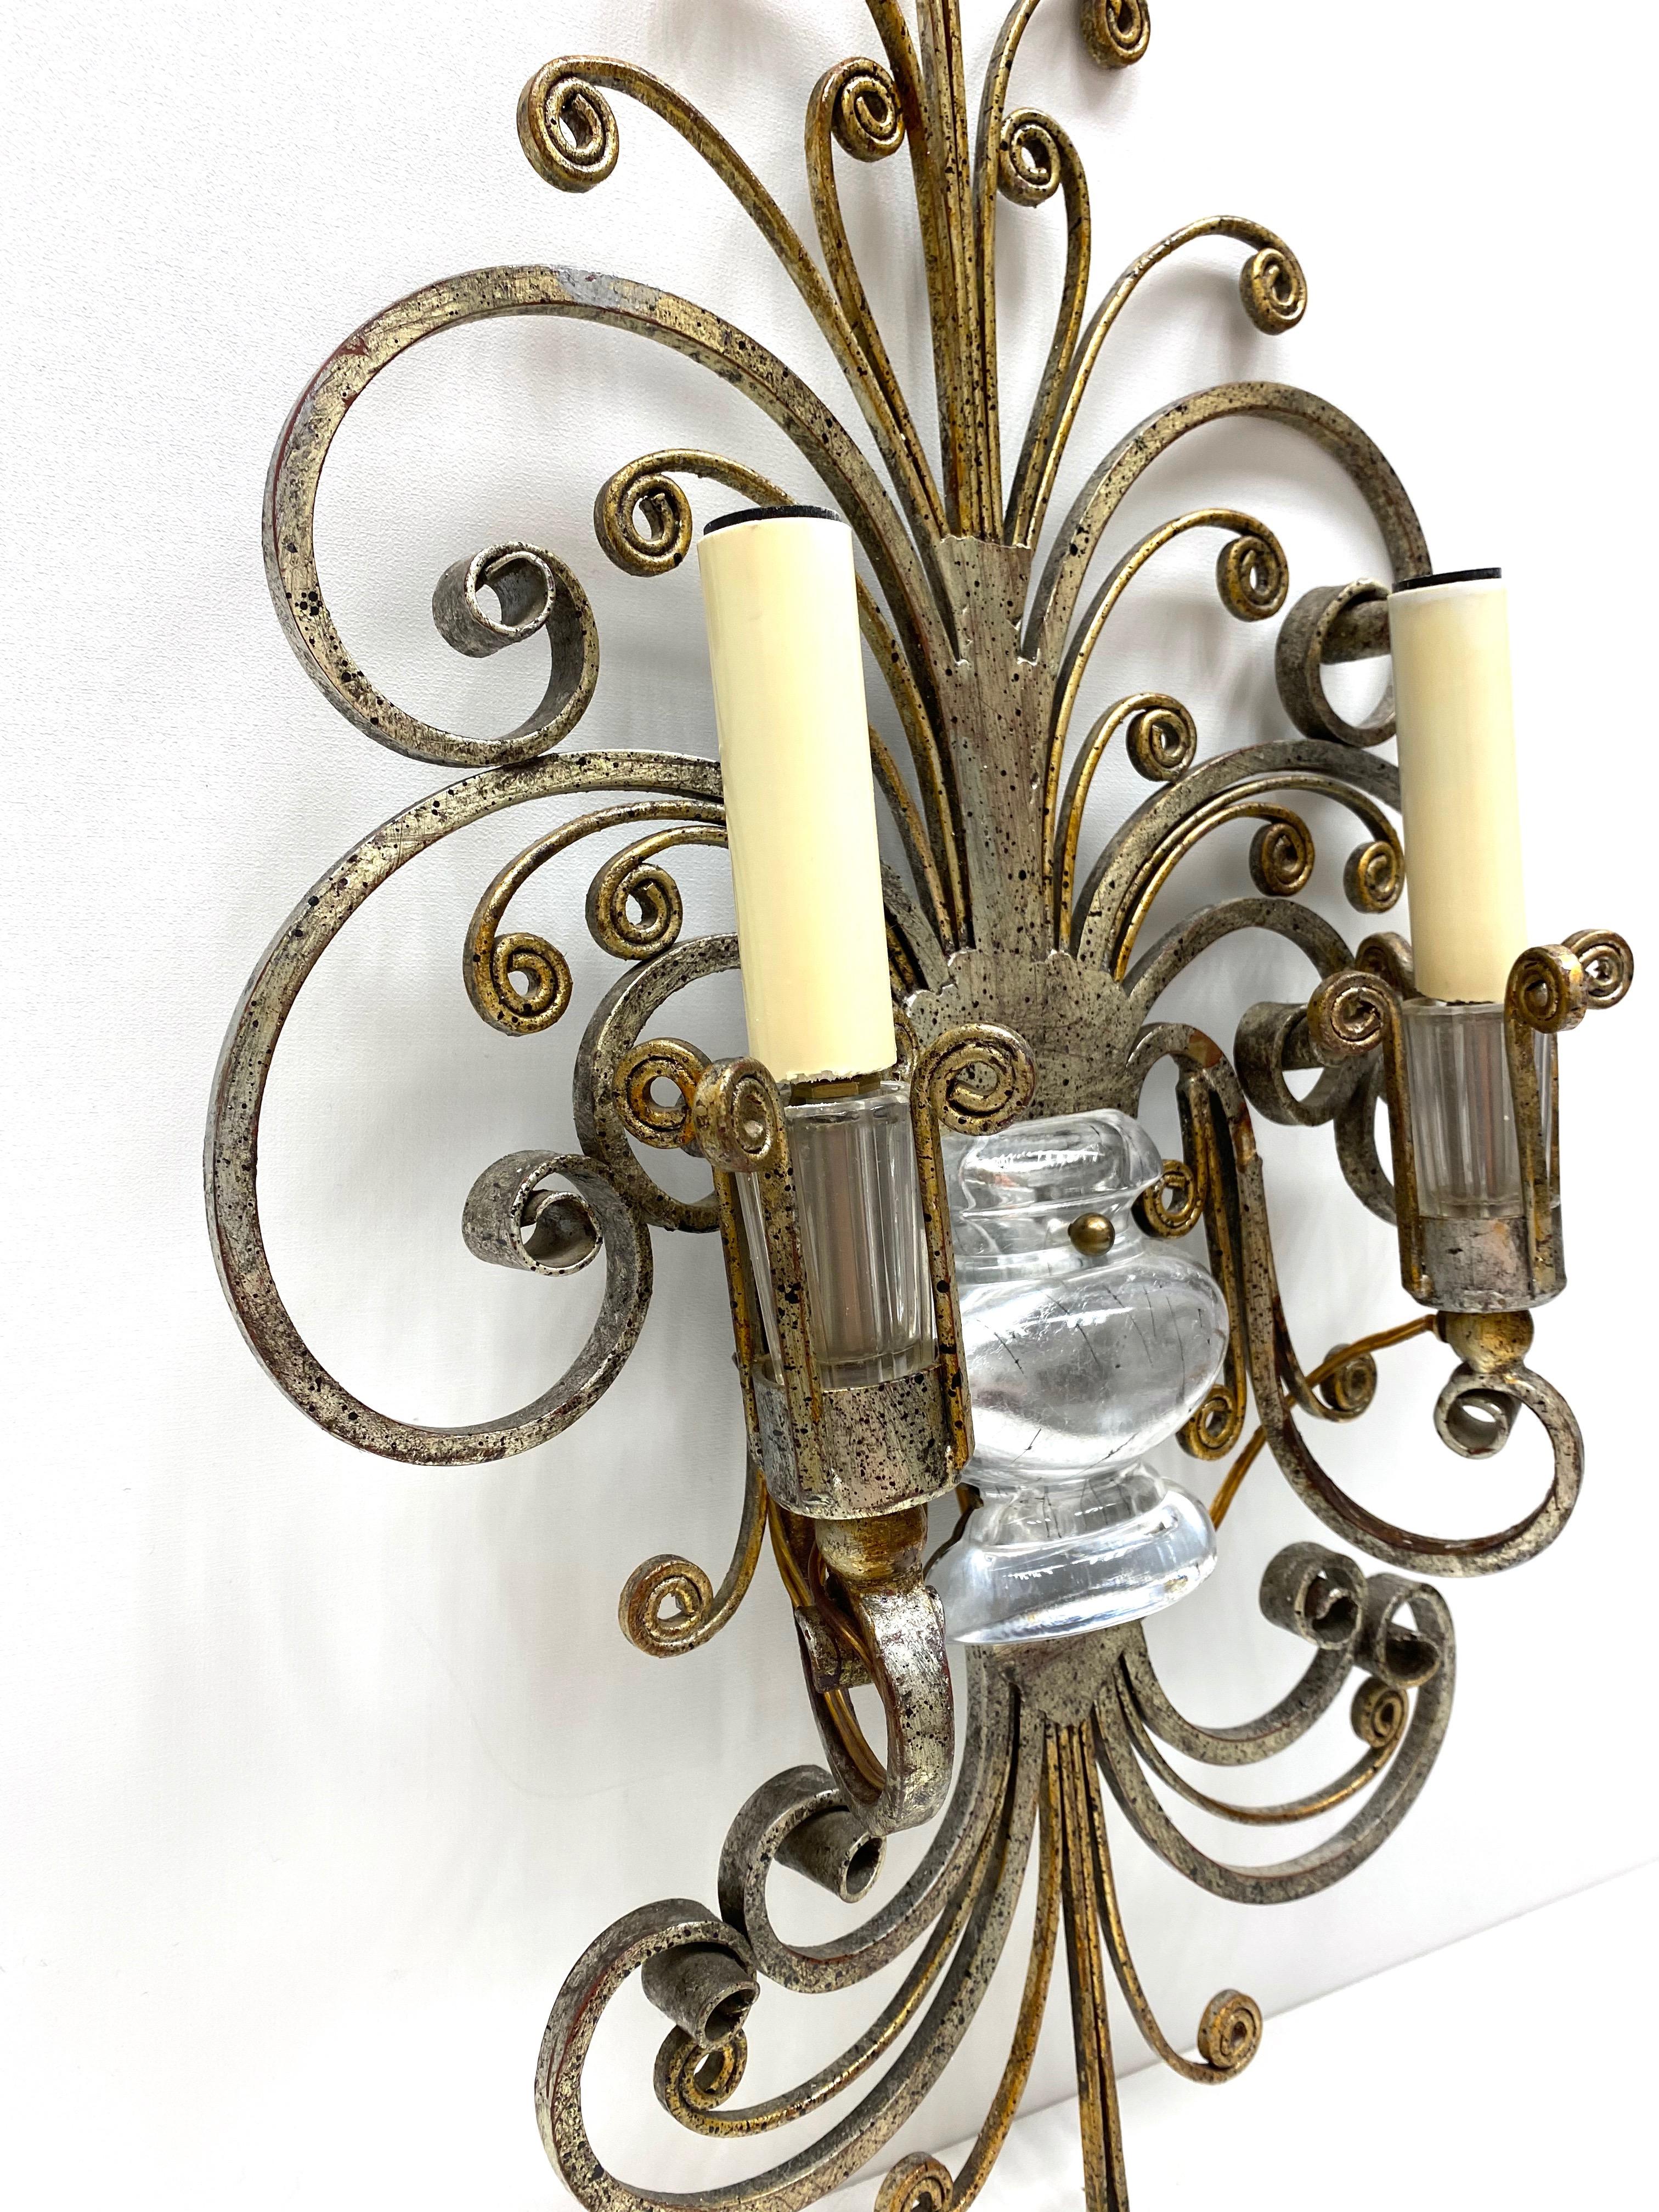 Single Monumental Italian Crystal Urn Motif Flower Wall Sconce by Banci Florence For Sale 2